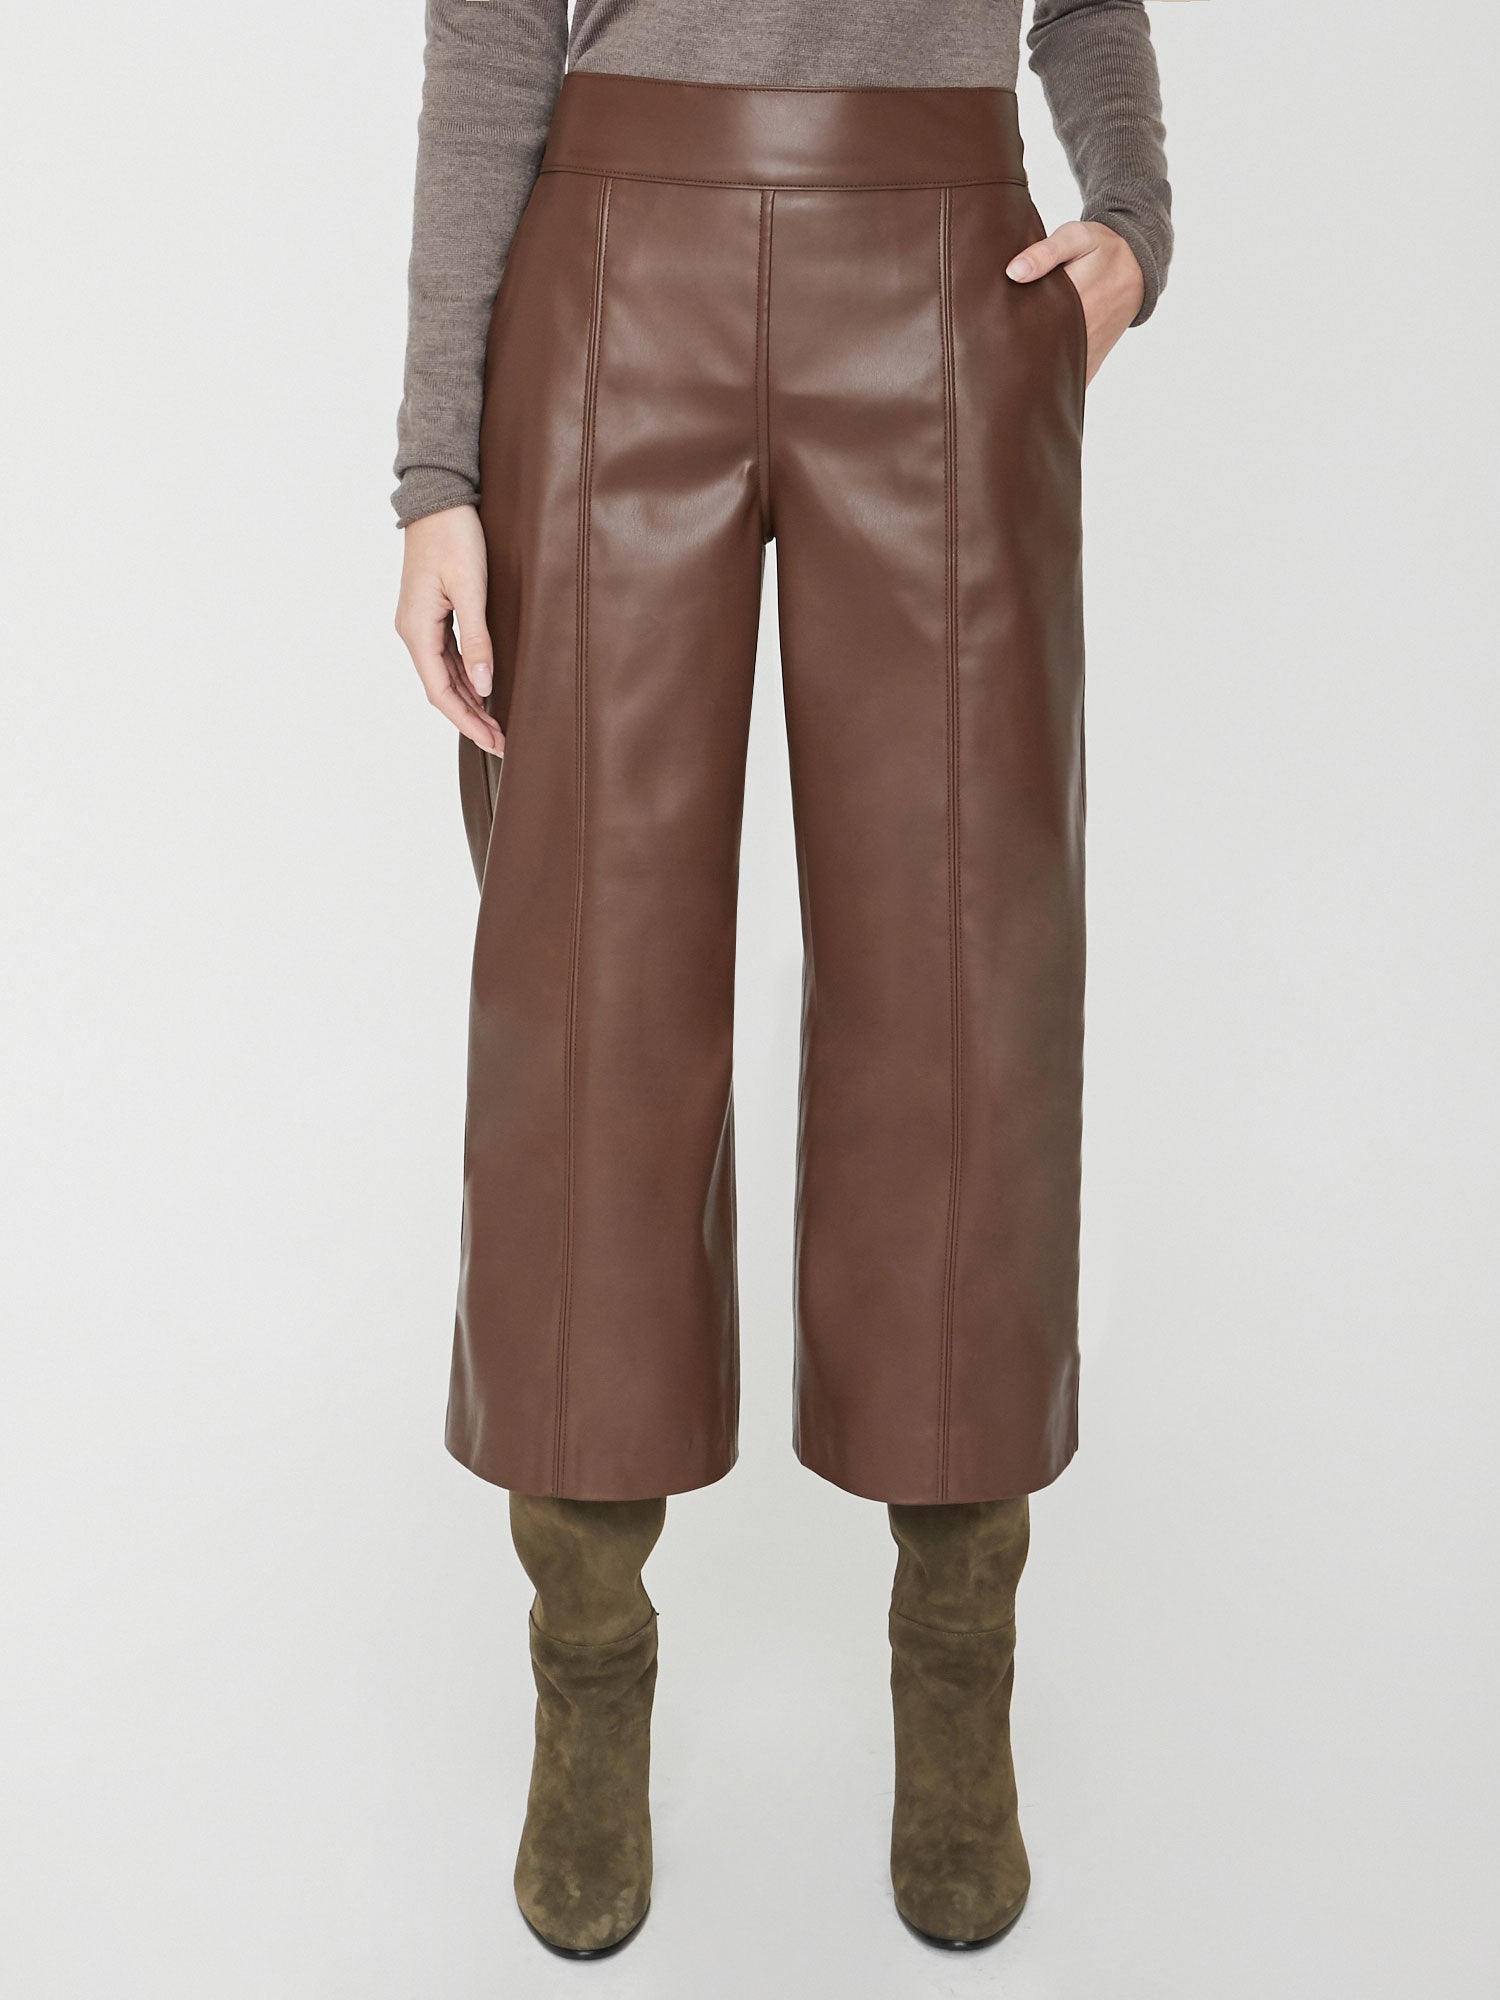 Frida cropped brown vegan leather pant front view